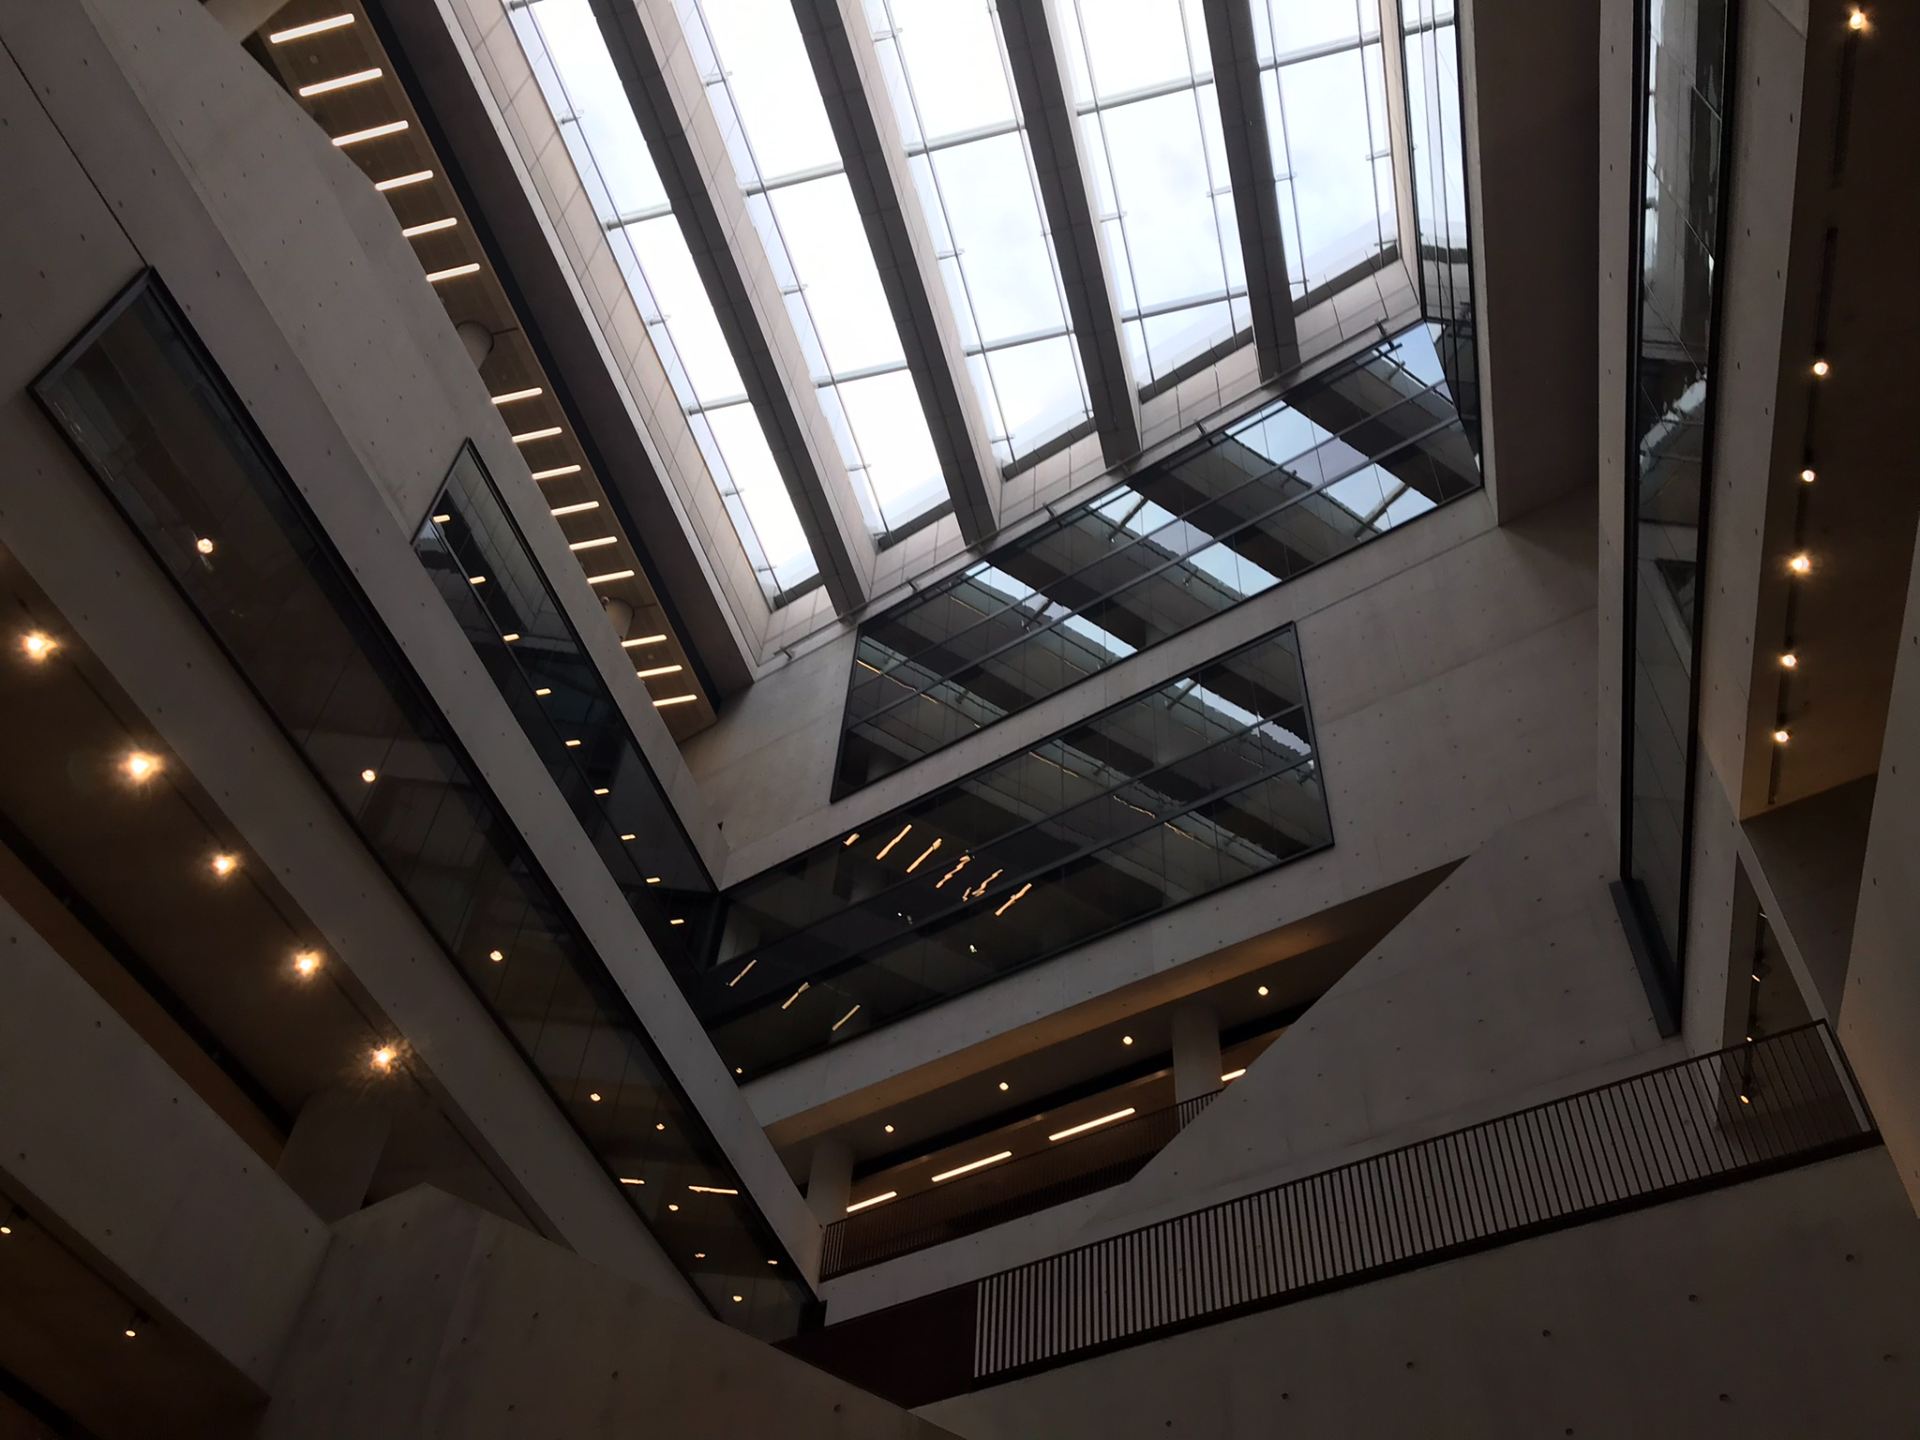 View up into the atrium, looking towards glazed roof